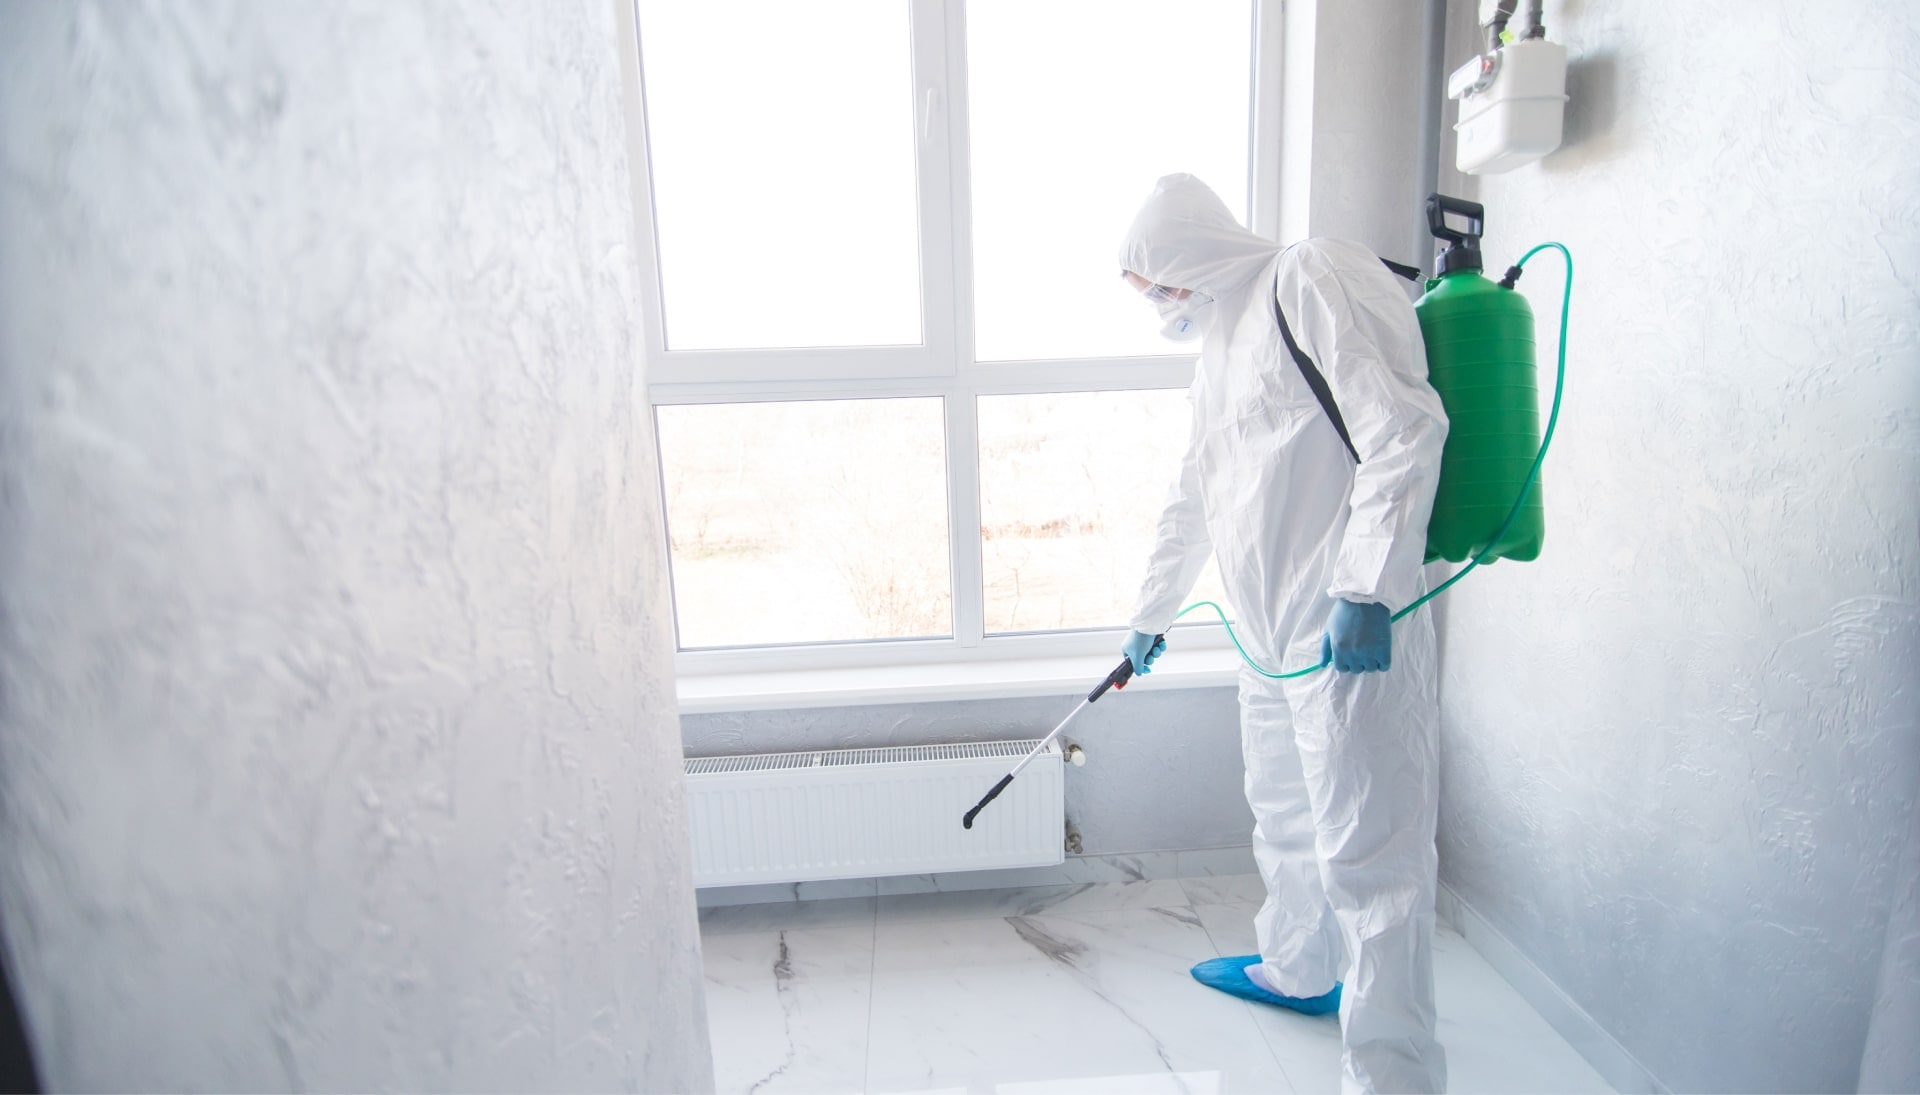 We provide the highest-quality mold inspection, testing, and removal services in the Murfreesboro, Tennessee area.